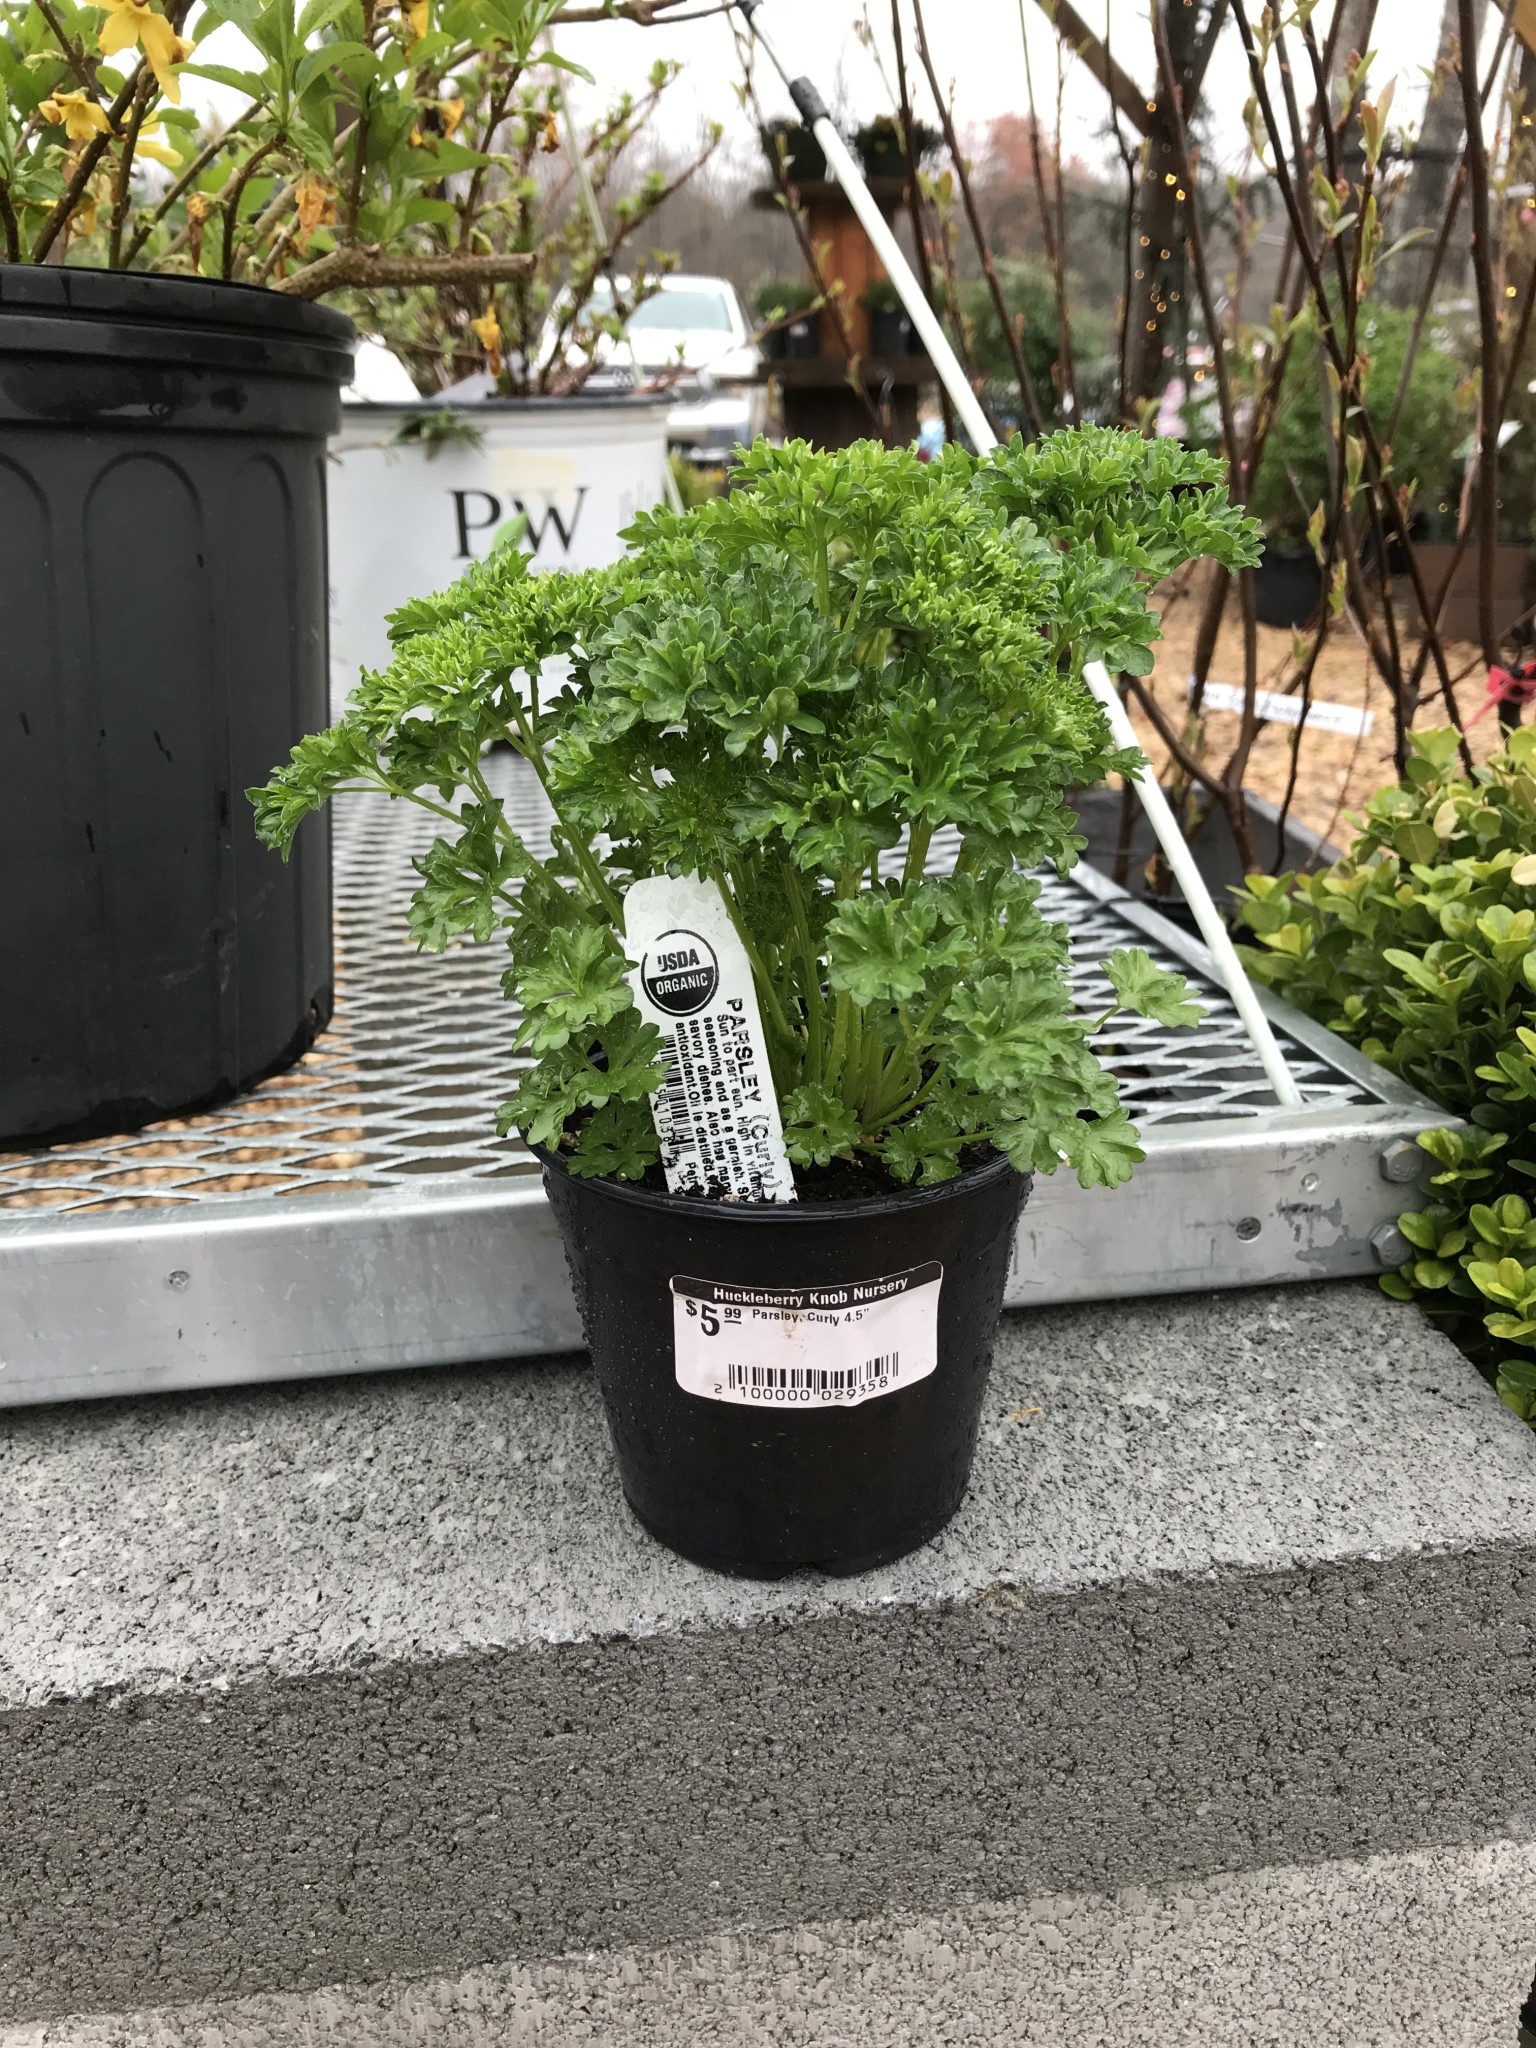 Parsley, Curly 4" pot